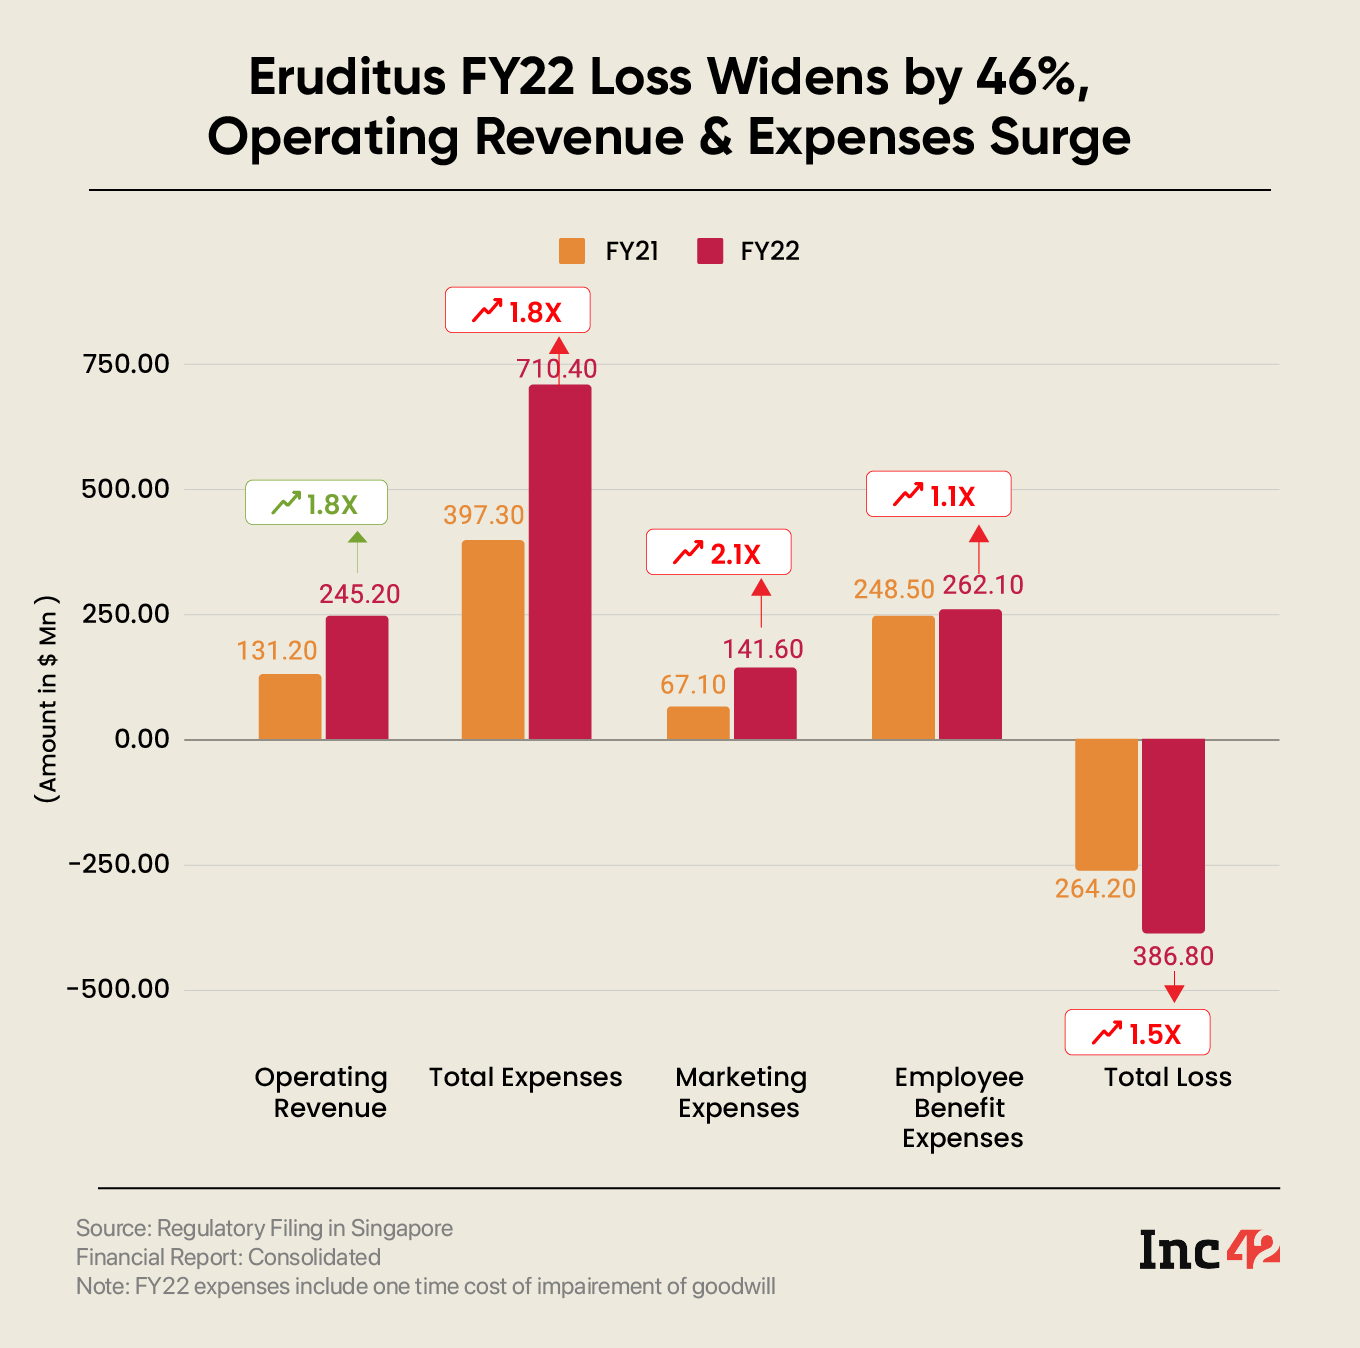 Eruditus FY22 Loss Widens by 46%, Operating Revenue & Expenses Surge